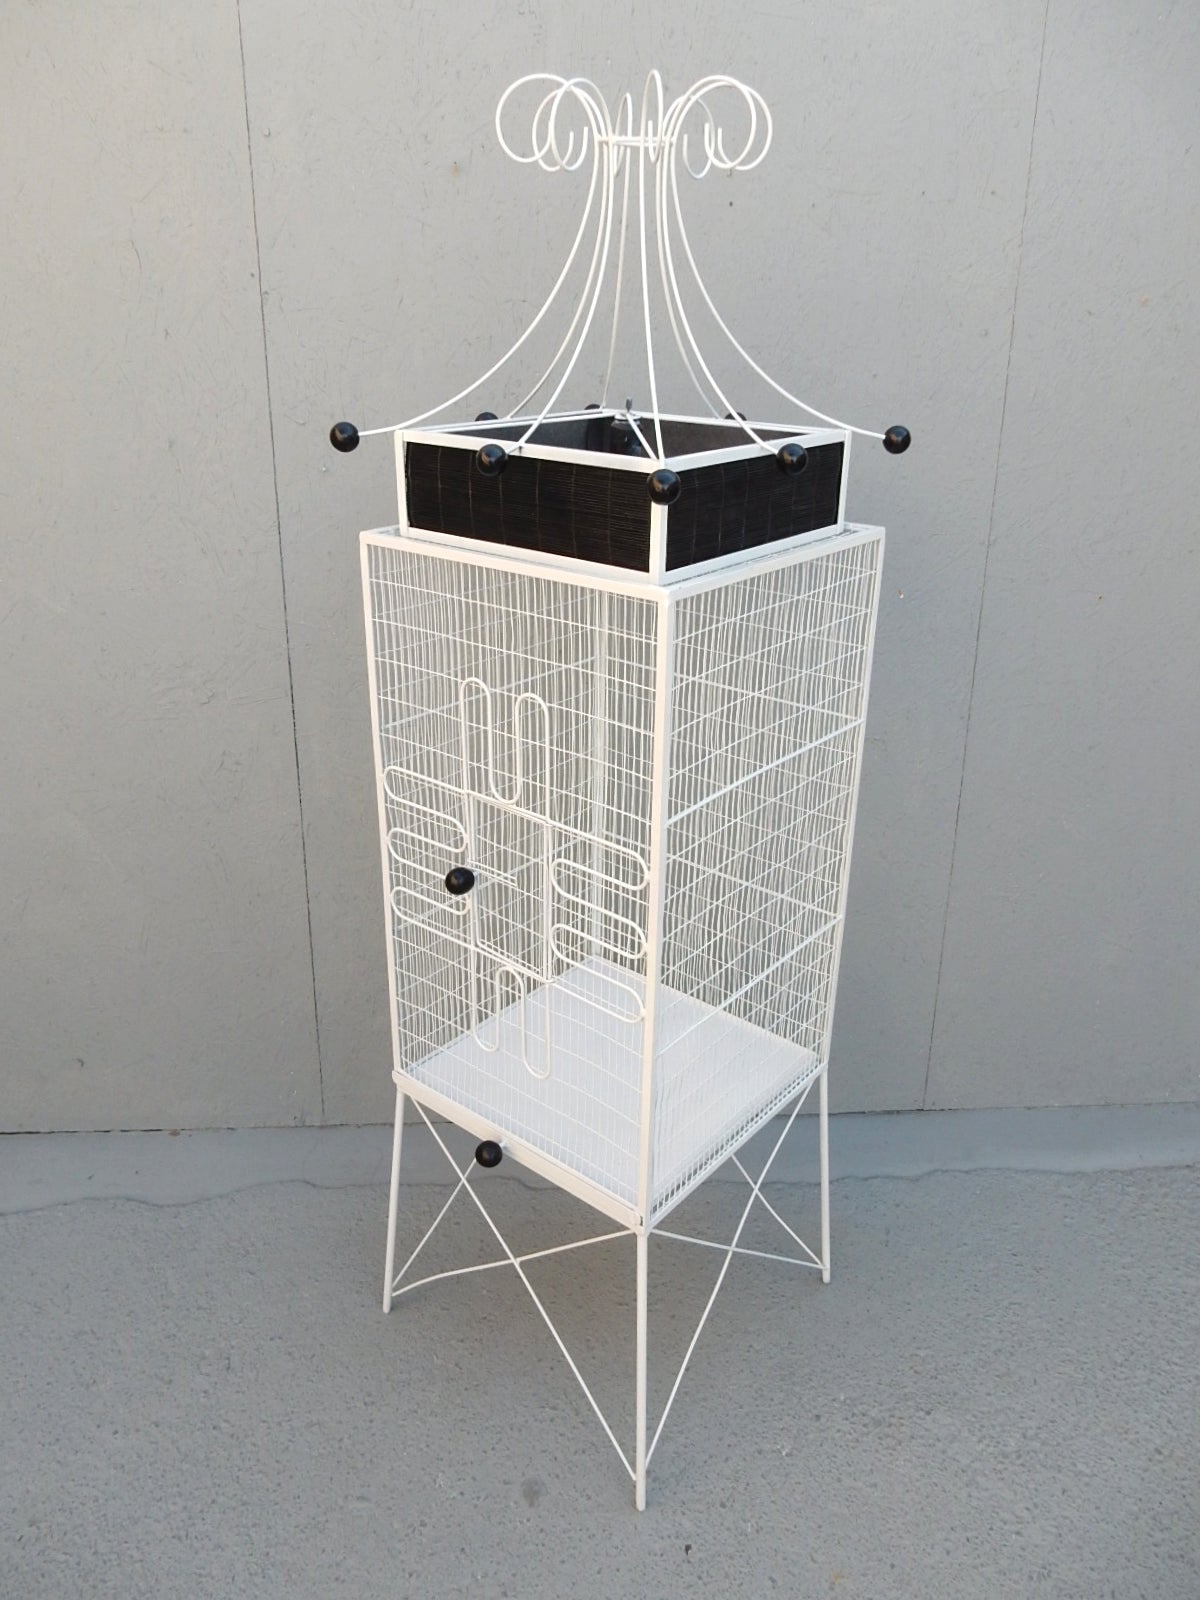 Outstanding full size sculptural metal and wood birdcage by designer Frederick Weinberg.
Clean with new enamel paint. Bulb socket in top with black bamboo shade sides.